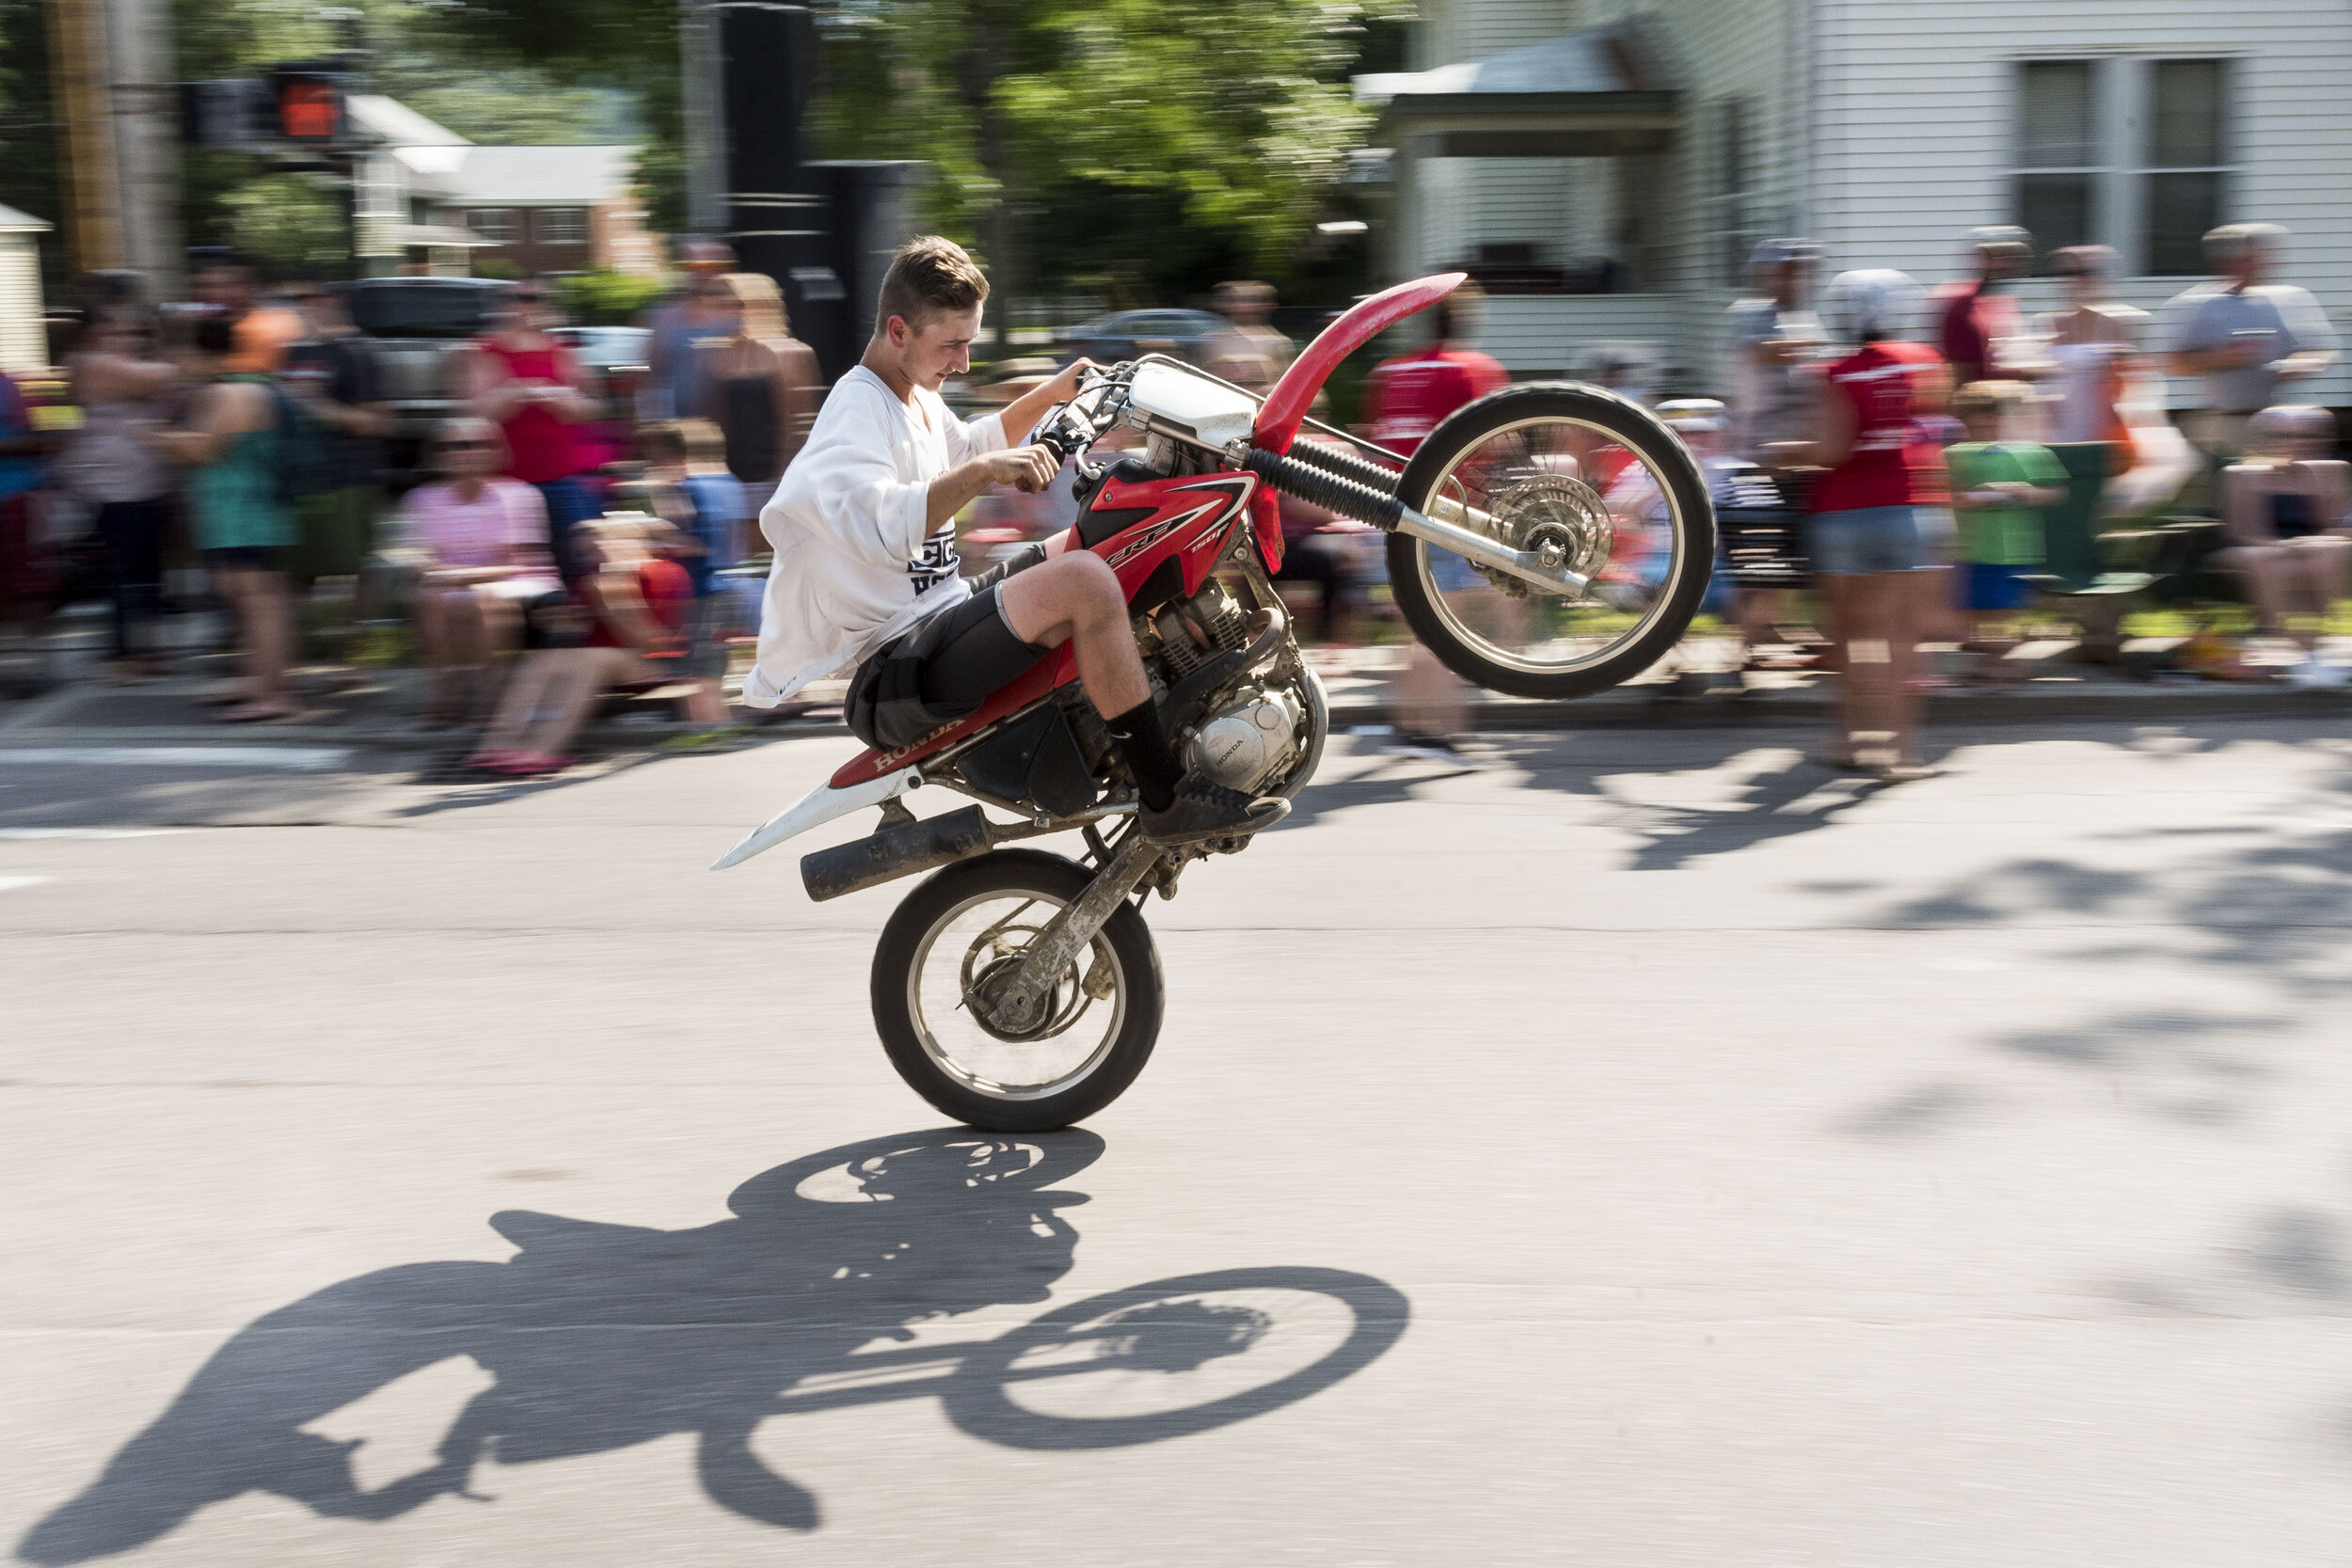  Noah Ladensack wows the crowd with a wheelie during the annual Not Quite Independence Day Parade in Waterbury, VT on Saturday, June 30th 2018.   